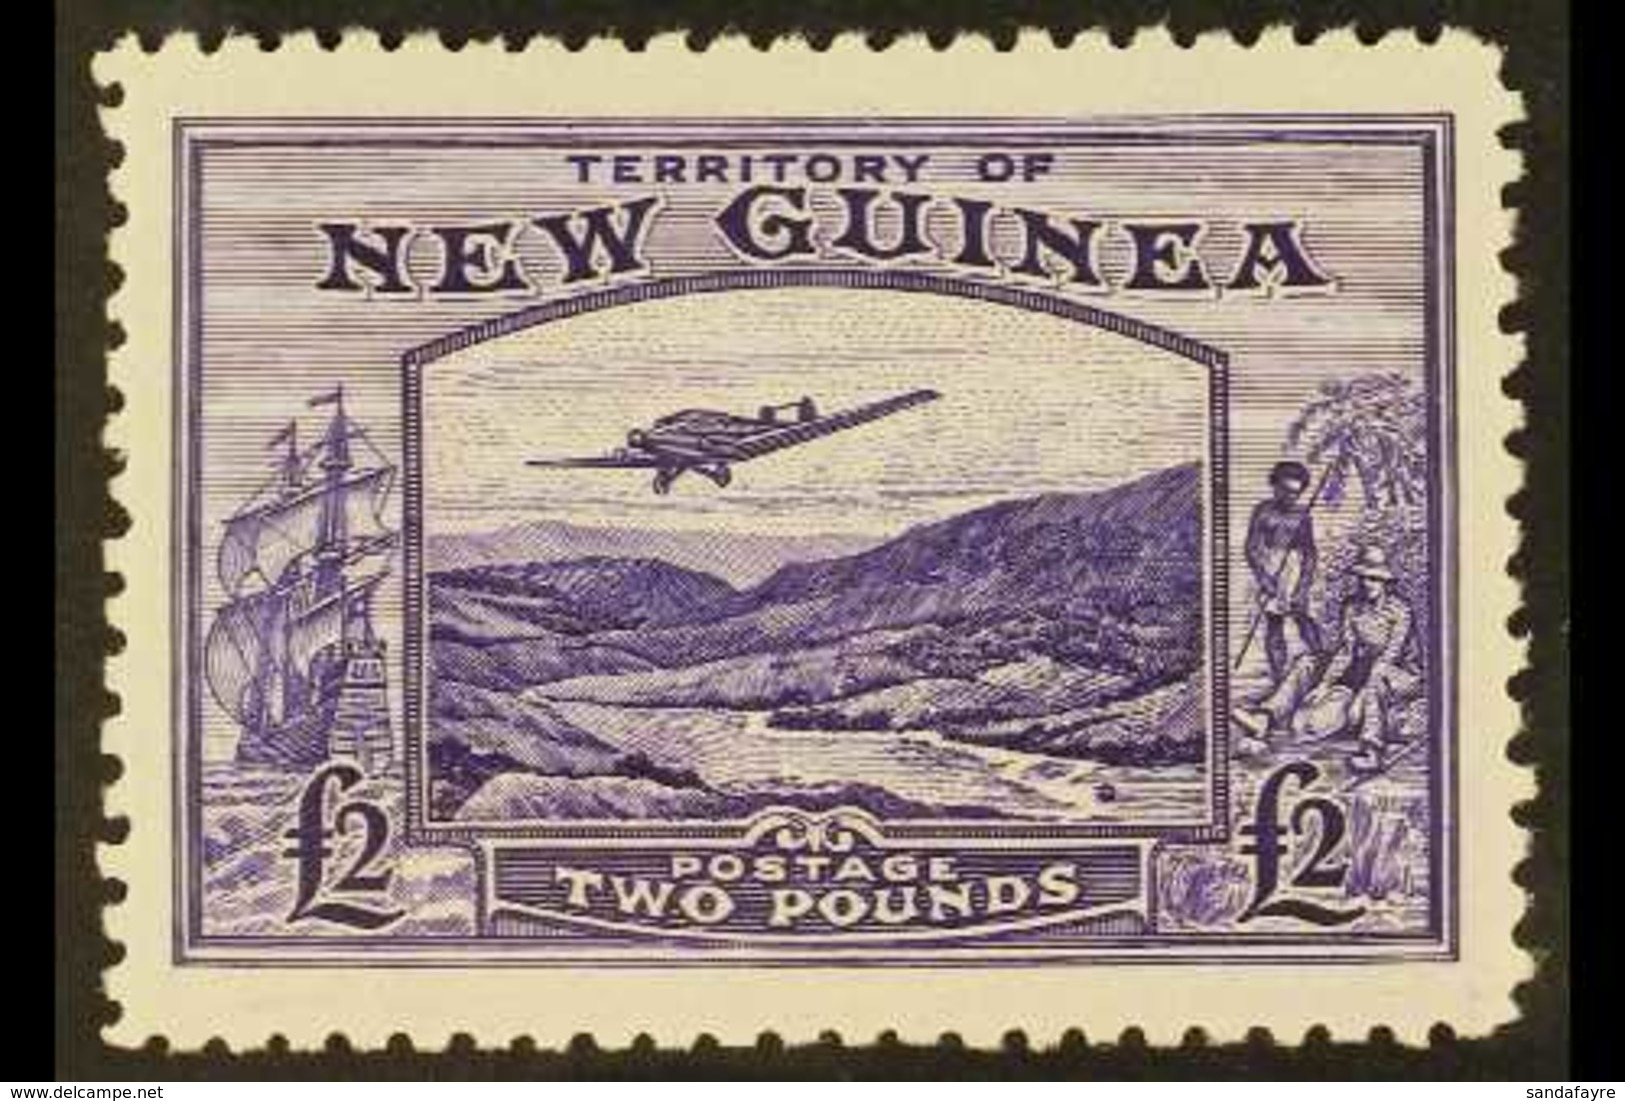 1935 £2 Bright Violet Air Bulolo Goldfields, SG 204, Never Hinged Mint. Scarce. For More Images, Please Visit Http://www - Papoea-Nieuw-Guinea